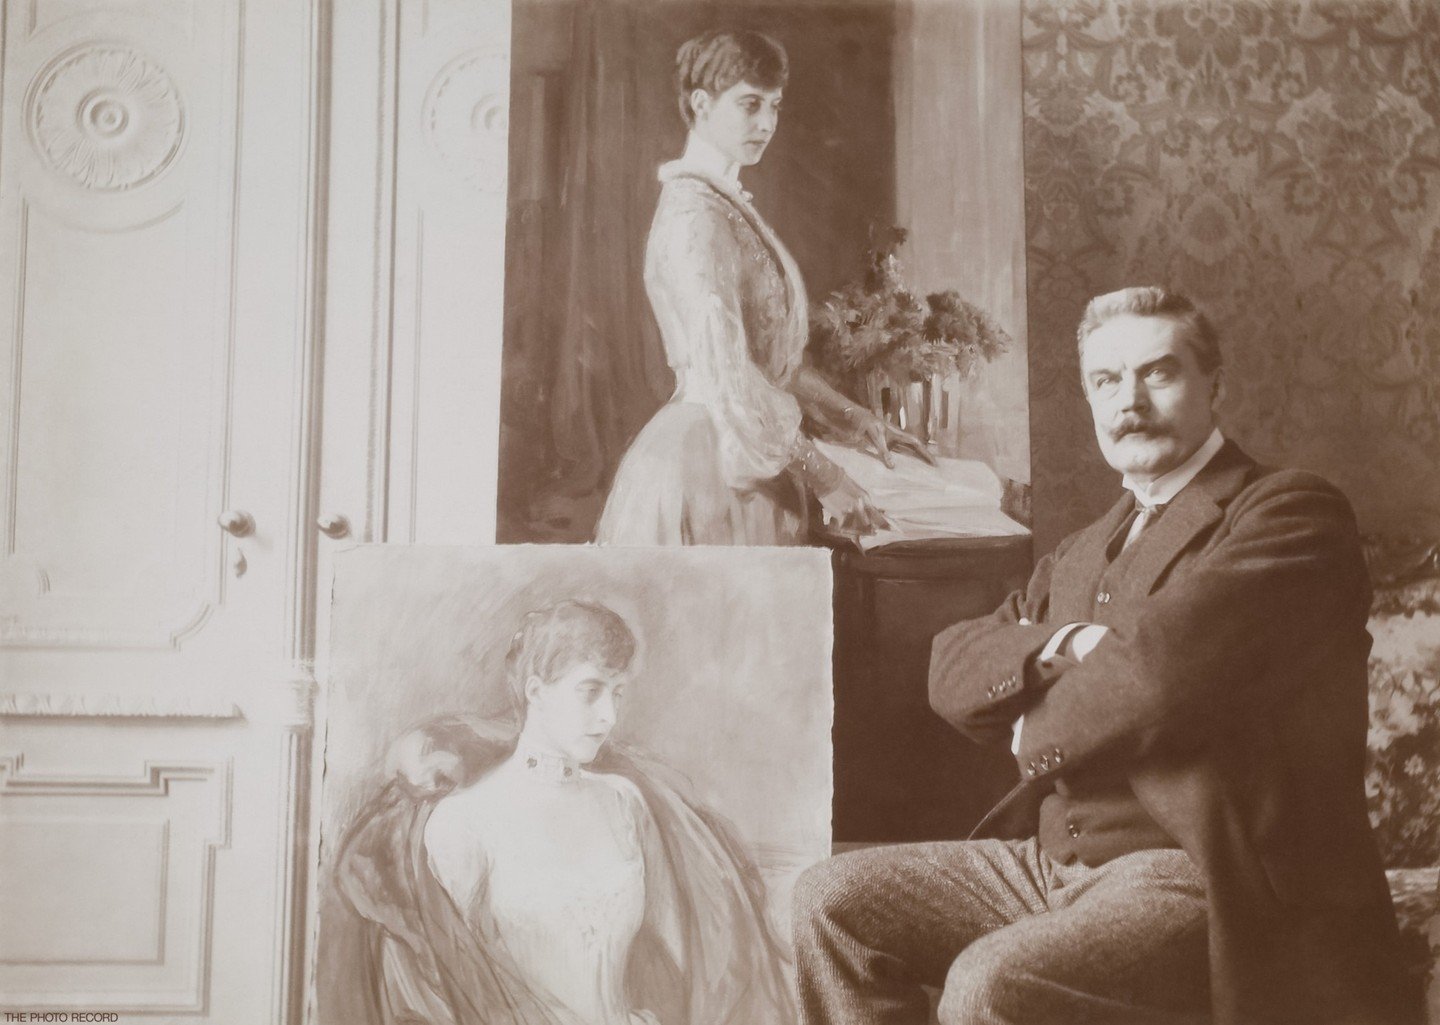 A striking image of Albert Edelfelt, renowned Finnish artist, seated next to his completed portrait of Princess Charlotte of Saxe-Meiningen. Edelfelt emerged as a leading figure in Finnish art during the late 19th century and significantly contribute